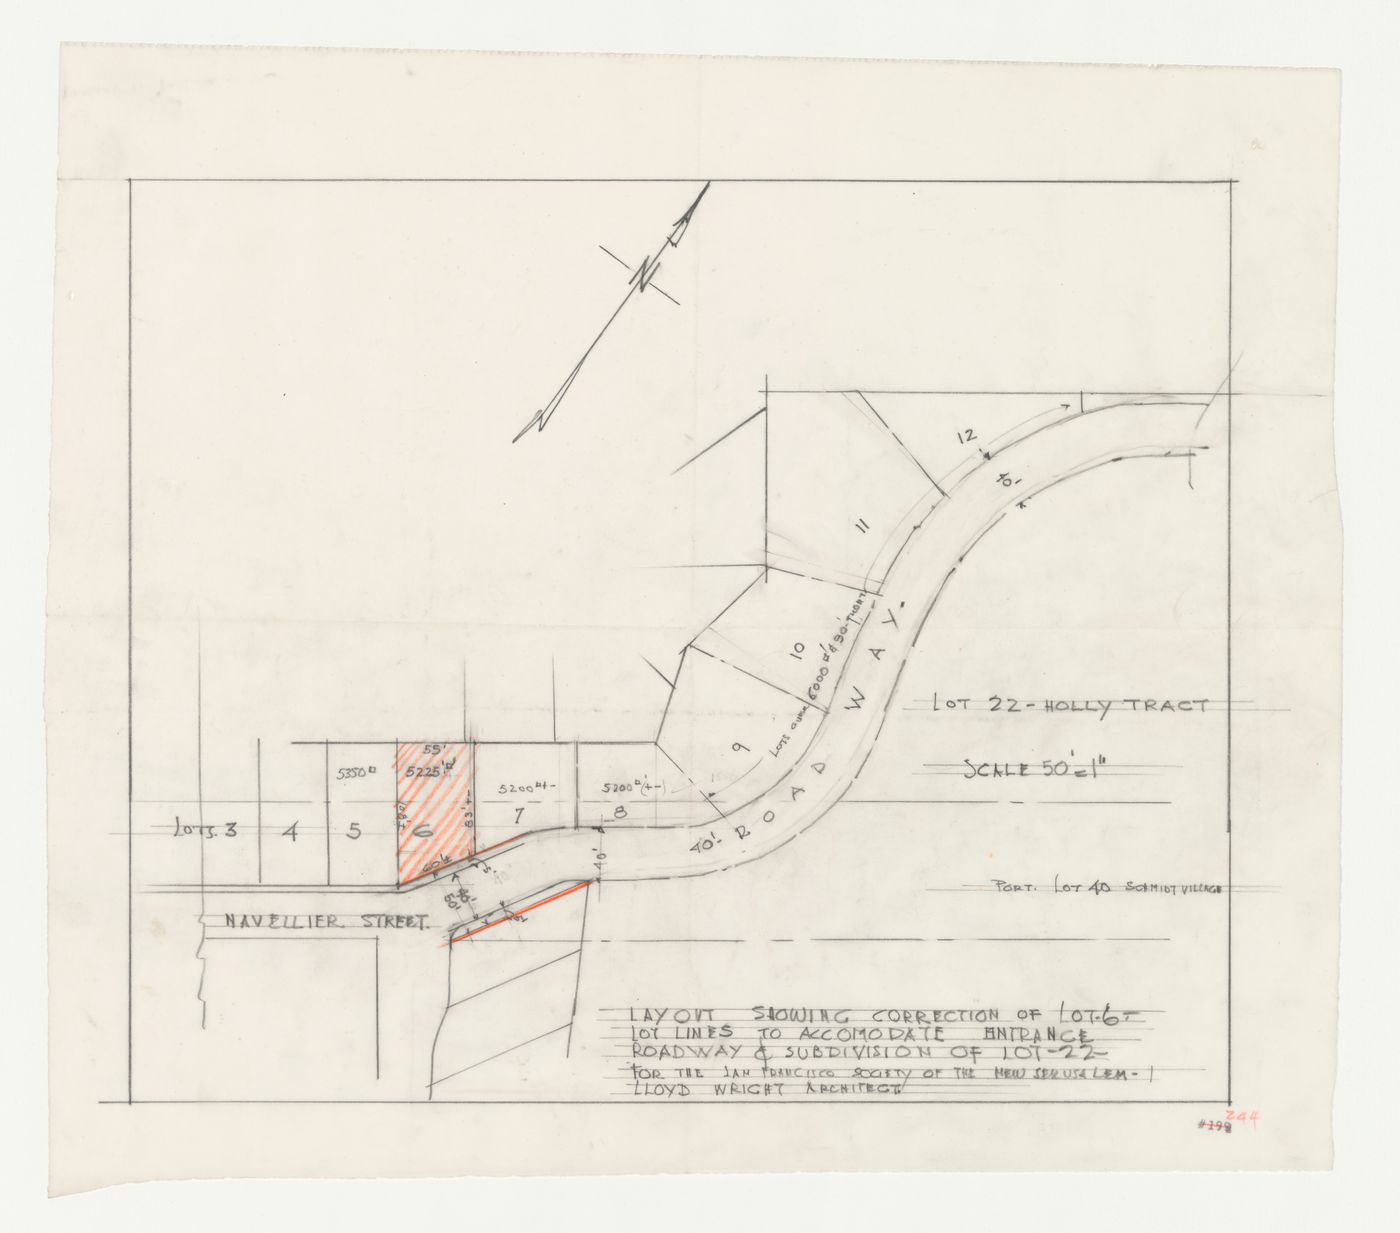 Swedenborg Memorial Chapel, El Cerrito, California: Partial site plan showing changes to the boundries for subdivision six